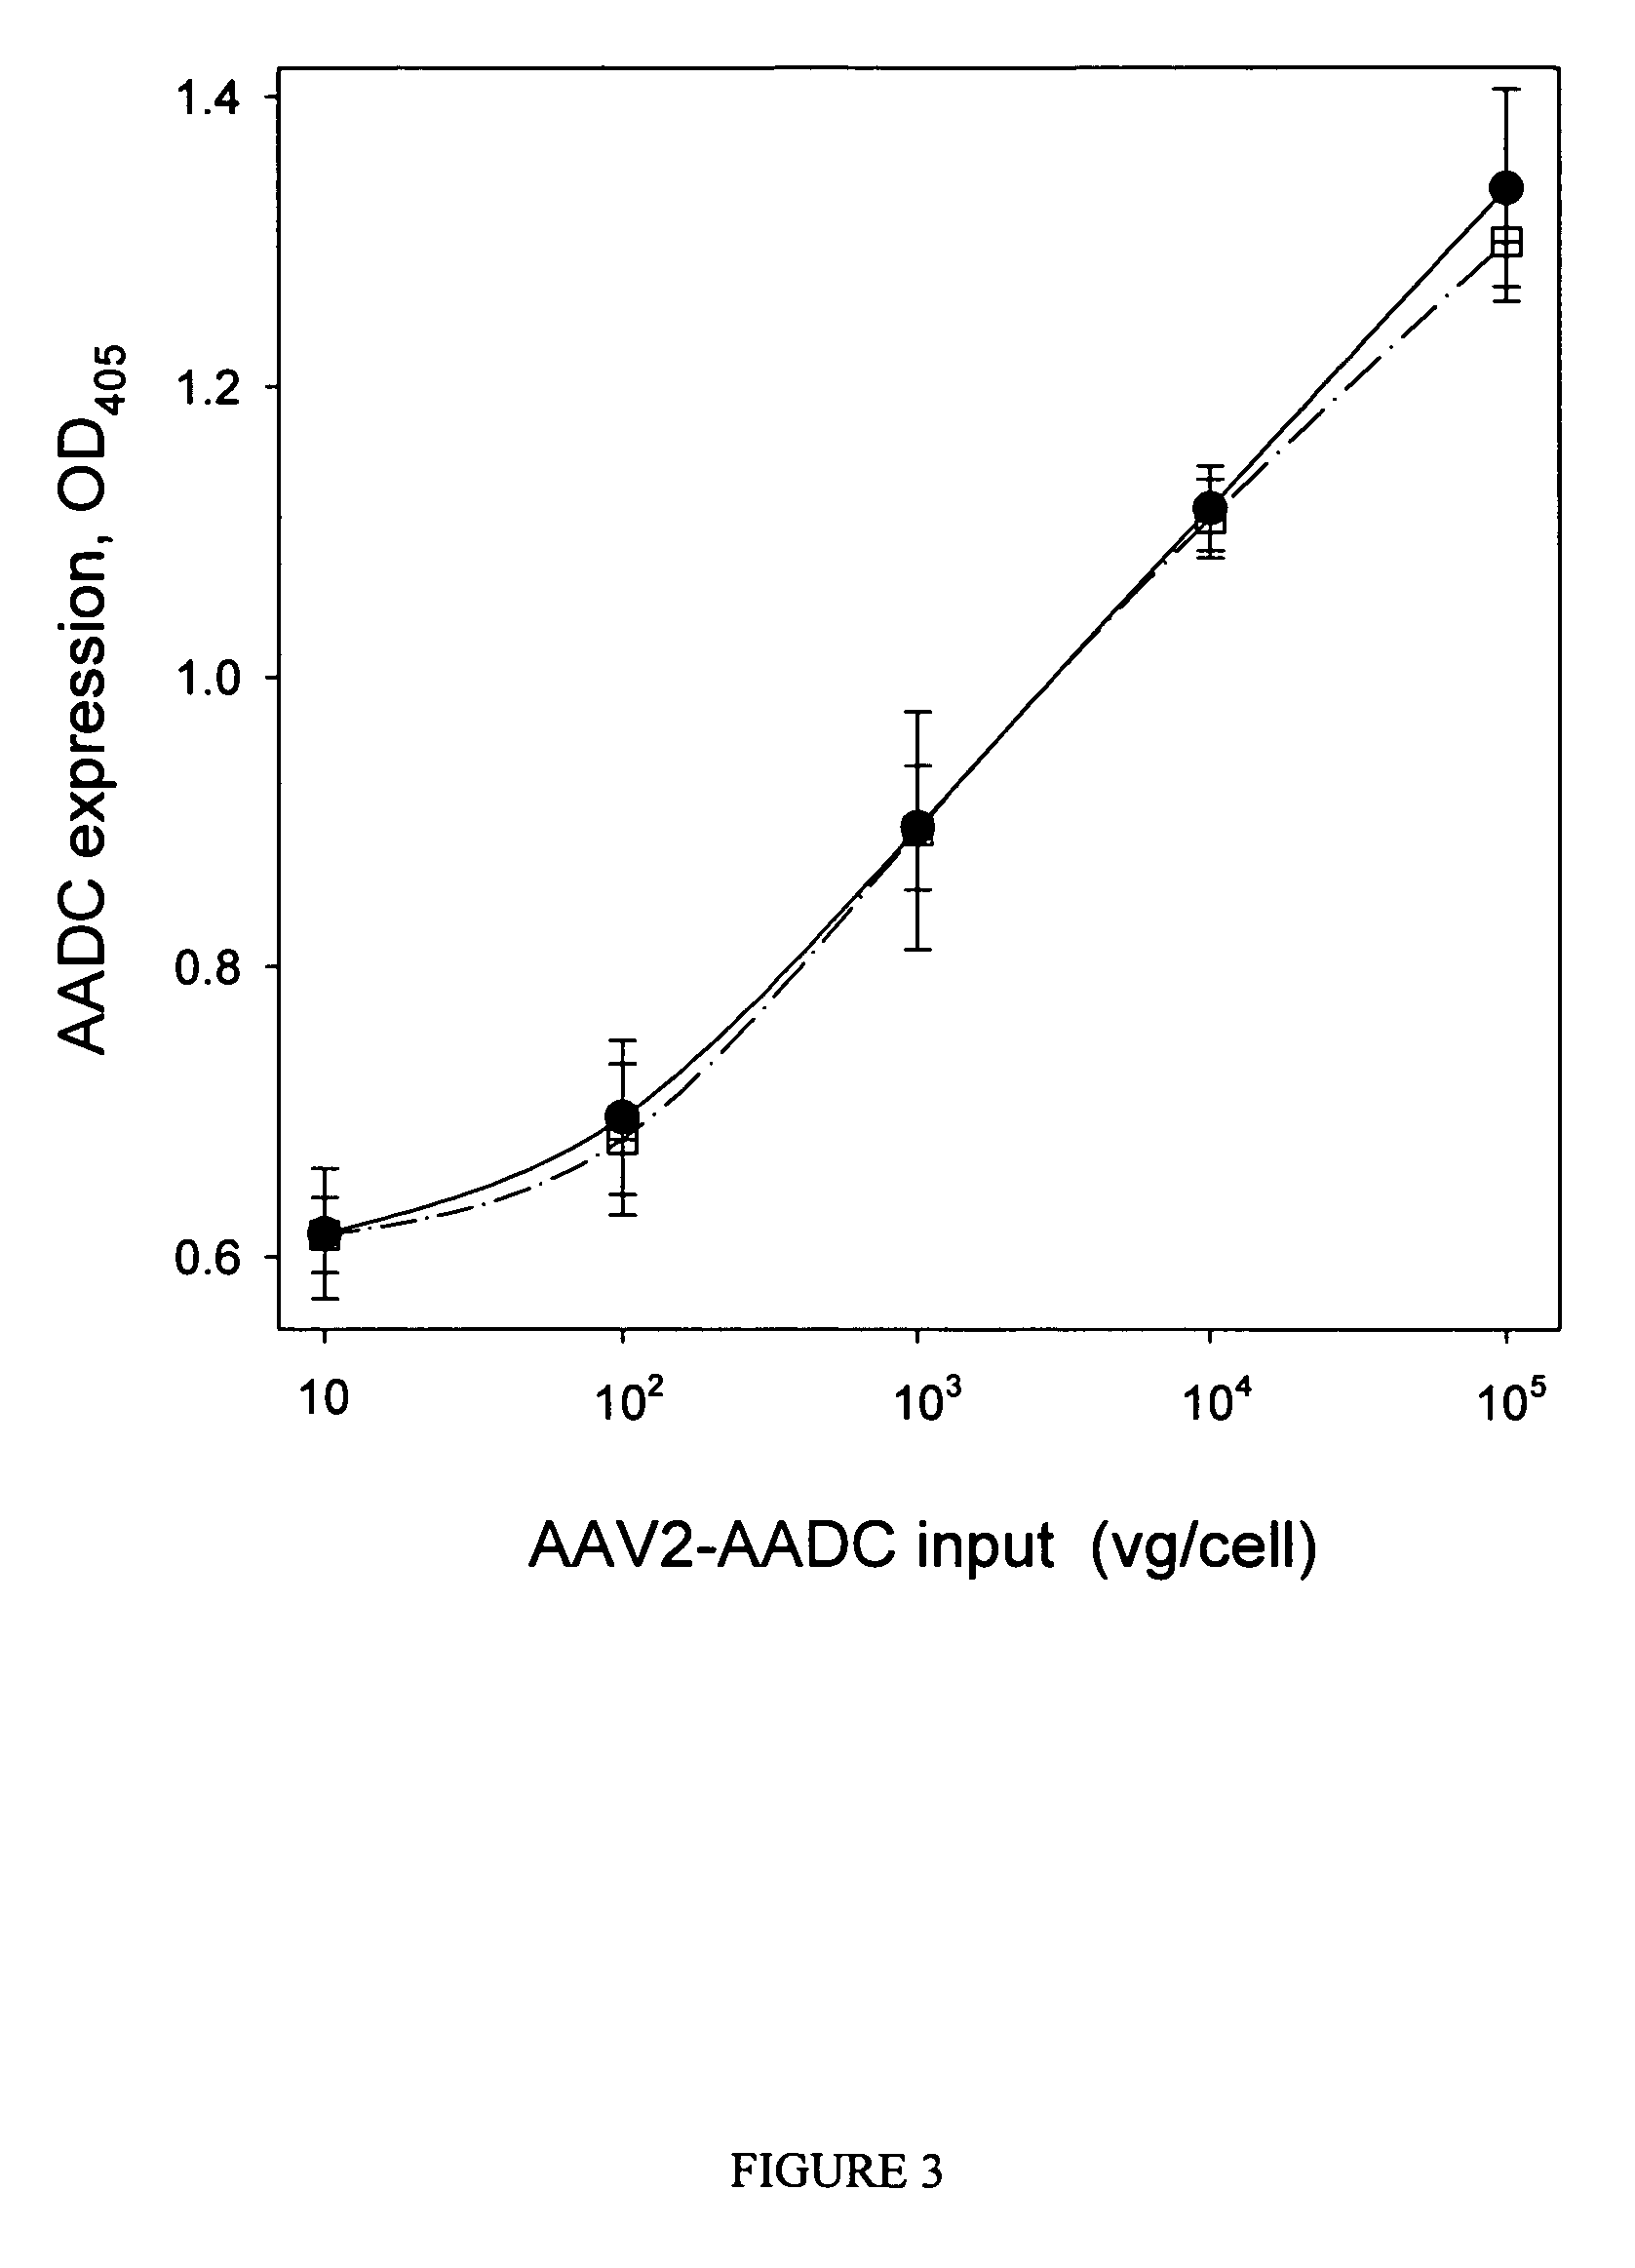 Compositions and methods to prevent AAV vector aggregation